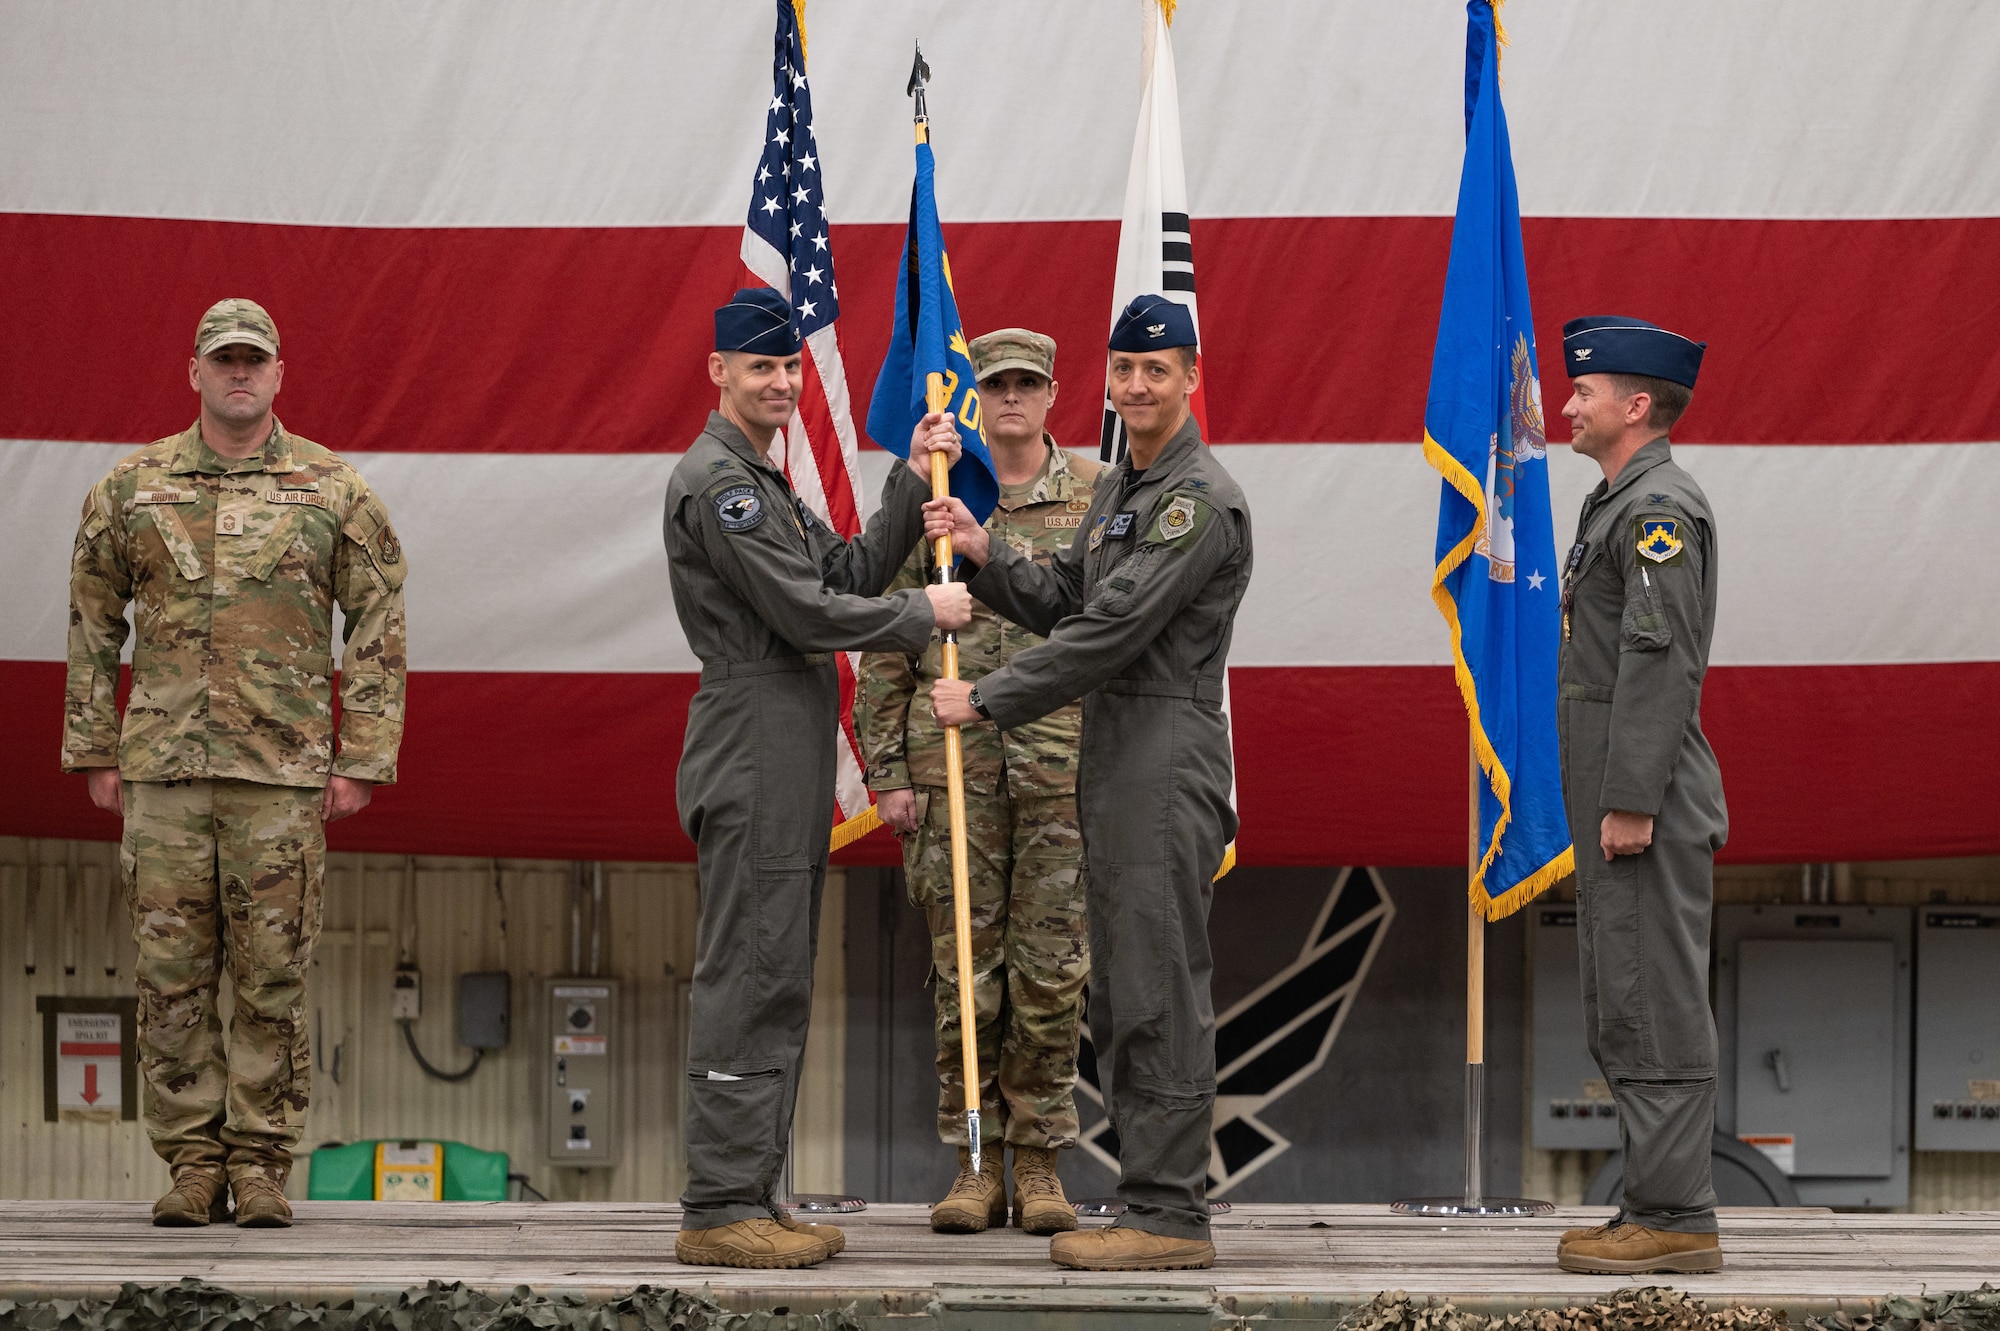 Col. Timothy B. Murphy, left, 8th Fighter Wing commander, gives a guidon to Col. Michael G. McCarthy, 8th Operations Group incoming commander, to take command of the 8th OG during a change of command ceremony at Kunsan Air Base, Republic of Korea, June 2, 2023. The 8th OG commander is responsible for conventional air-to-ground and air-to-air missions in support of armistice and wartime taskings to defend the Republic of Korea. (U.S. Air Force photo by Staff Sgt. Sadie Colbert)